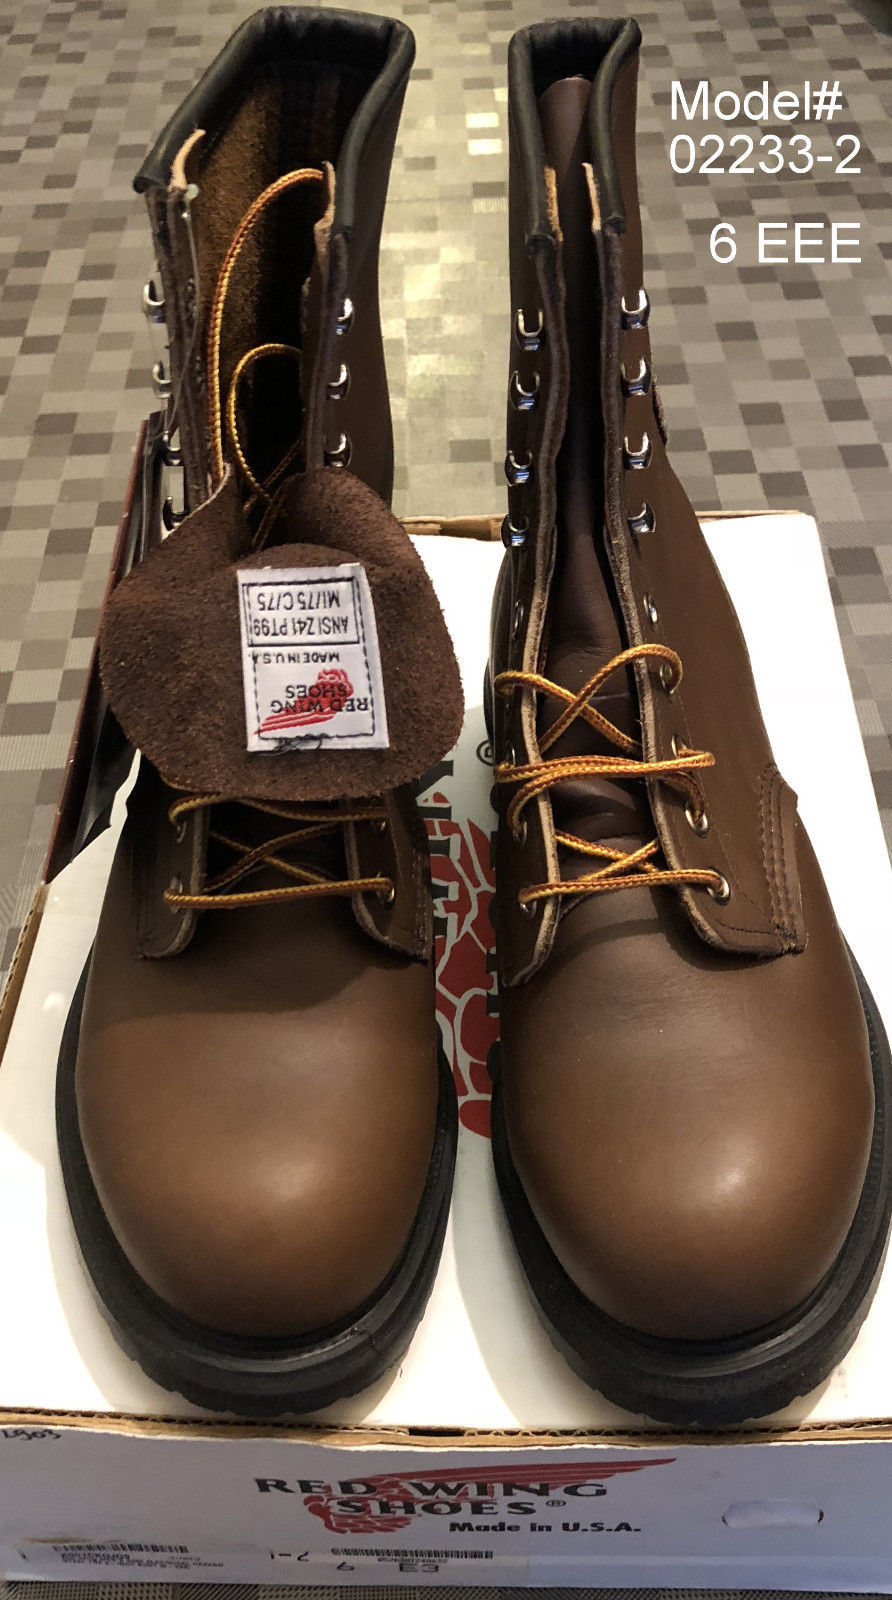 red wing boots ansi z41 pt99